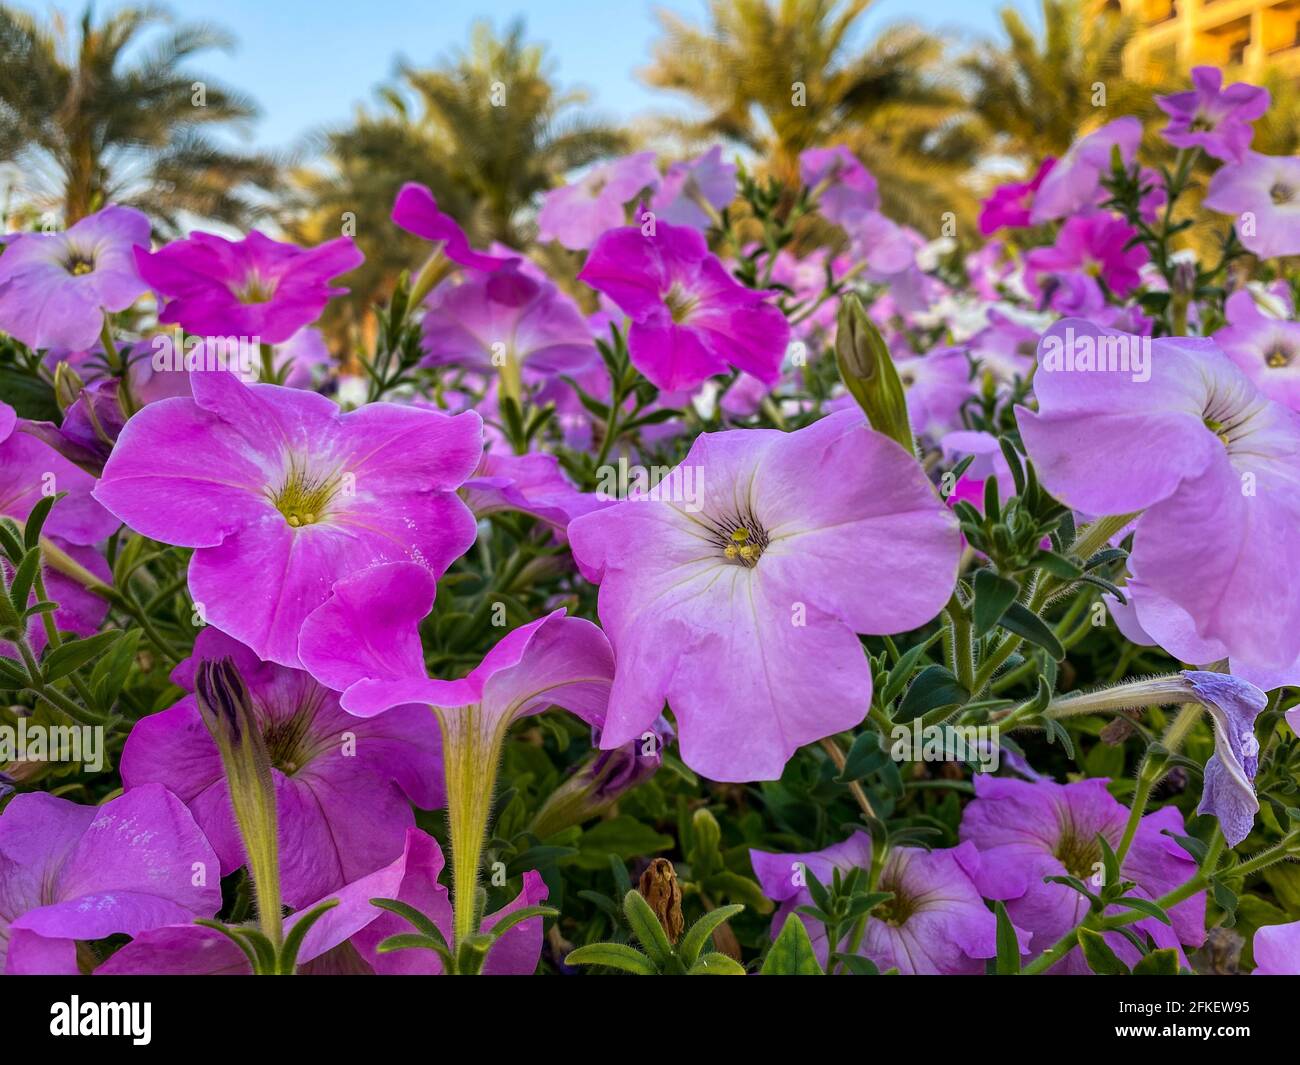 Purple and Pink misty lilac spreading petunia (Petunia hybrida) flowers on a beautiful sunny day. Stock Photo